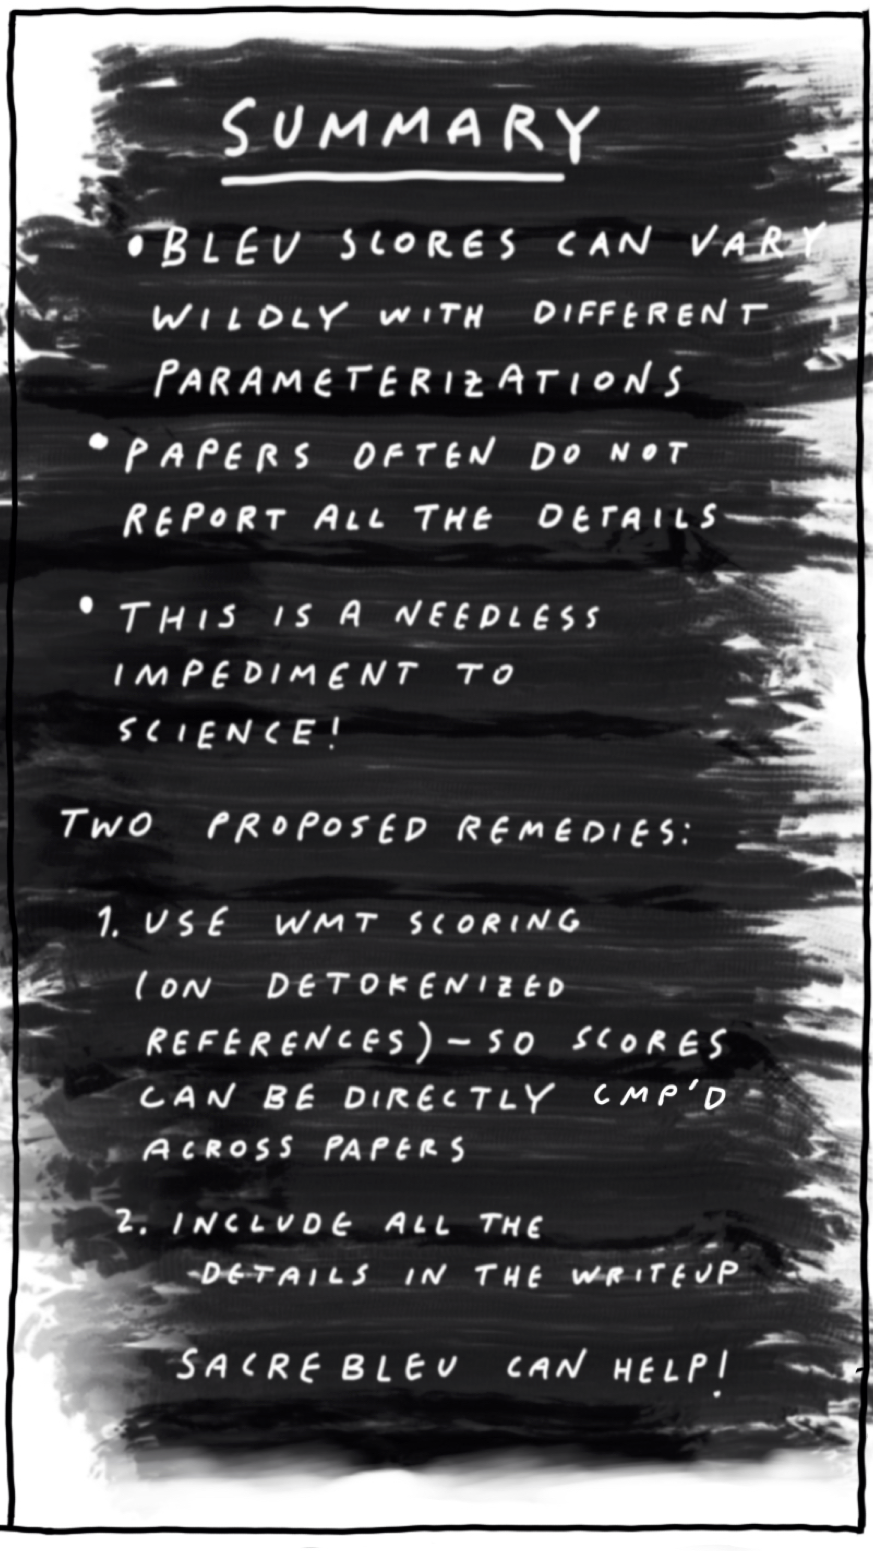 White text on a blackboard-style background reads "Summary" with three bullets: (1) BLEU scores can vary wildly with different parameterizations (2) Papers often do not report all the details (3) This is a needness impediment to science! Further text reads "Two proposed remedies: (1) Use WMT scoring (on detokenized references) so scores can be directly compared across papers (2) Include all the details in the writeup. At the bottom, the text reads, "SacreBLEU can help!"